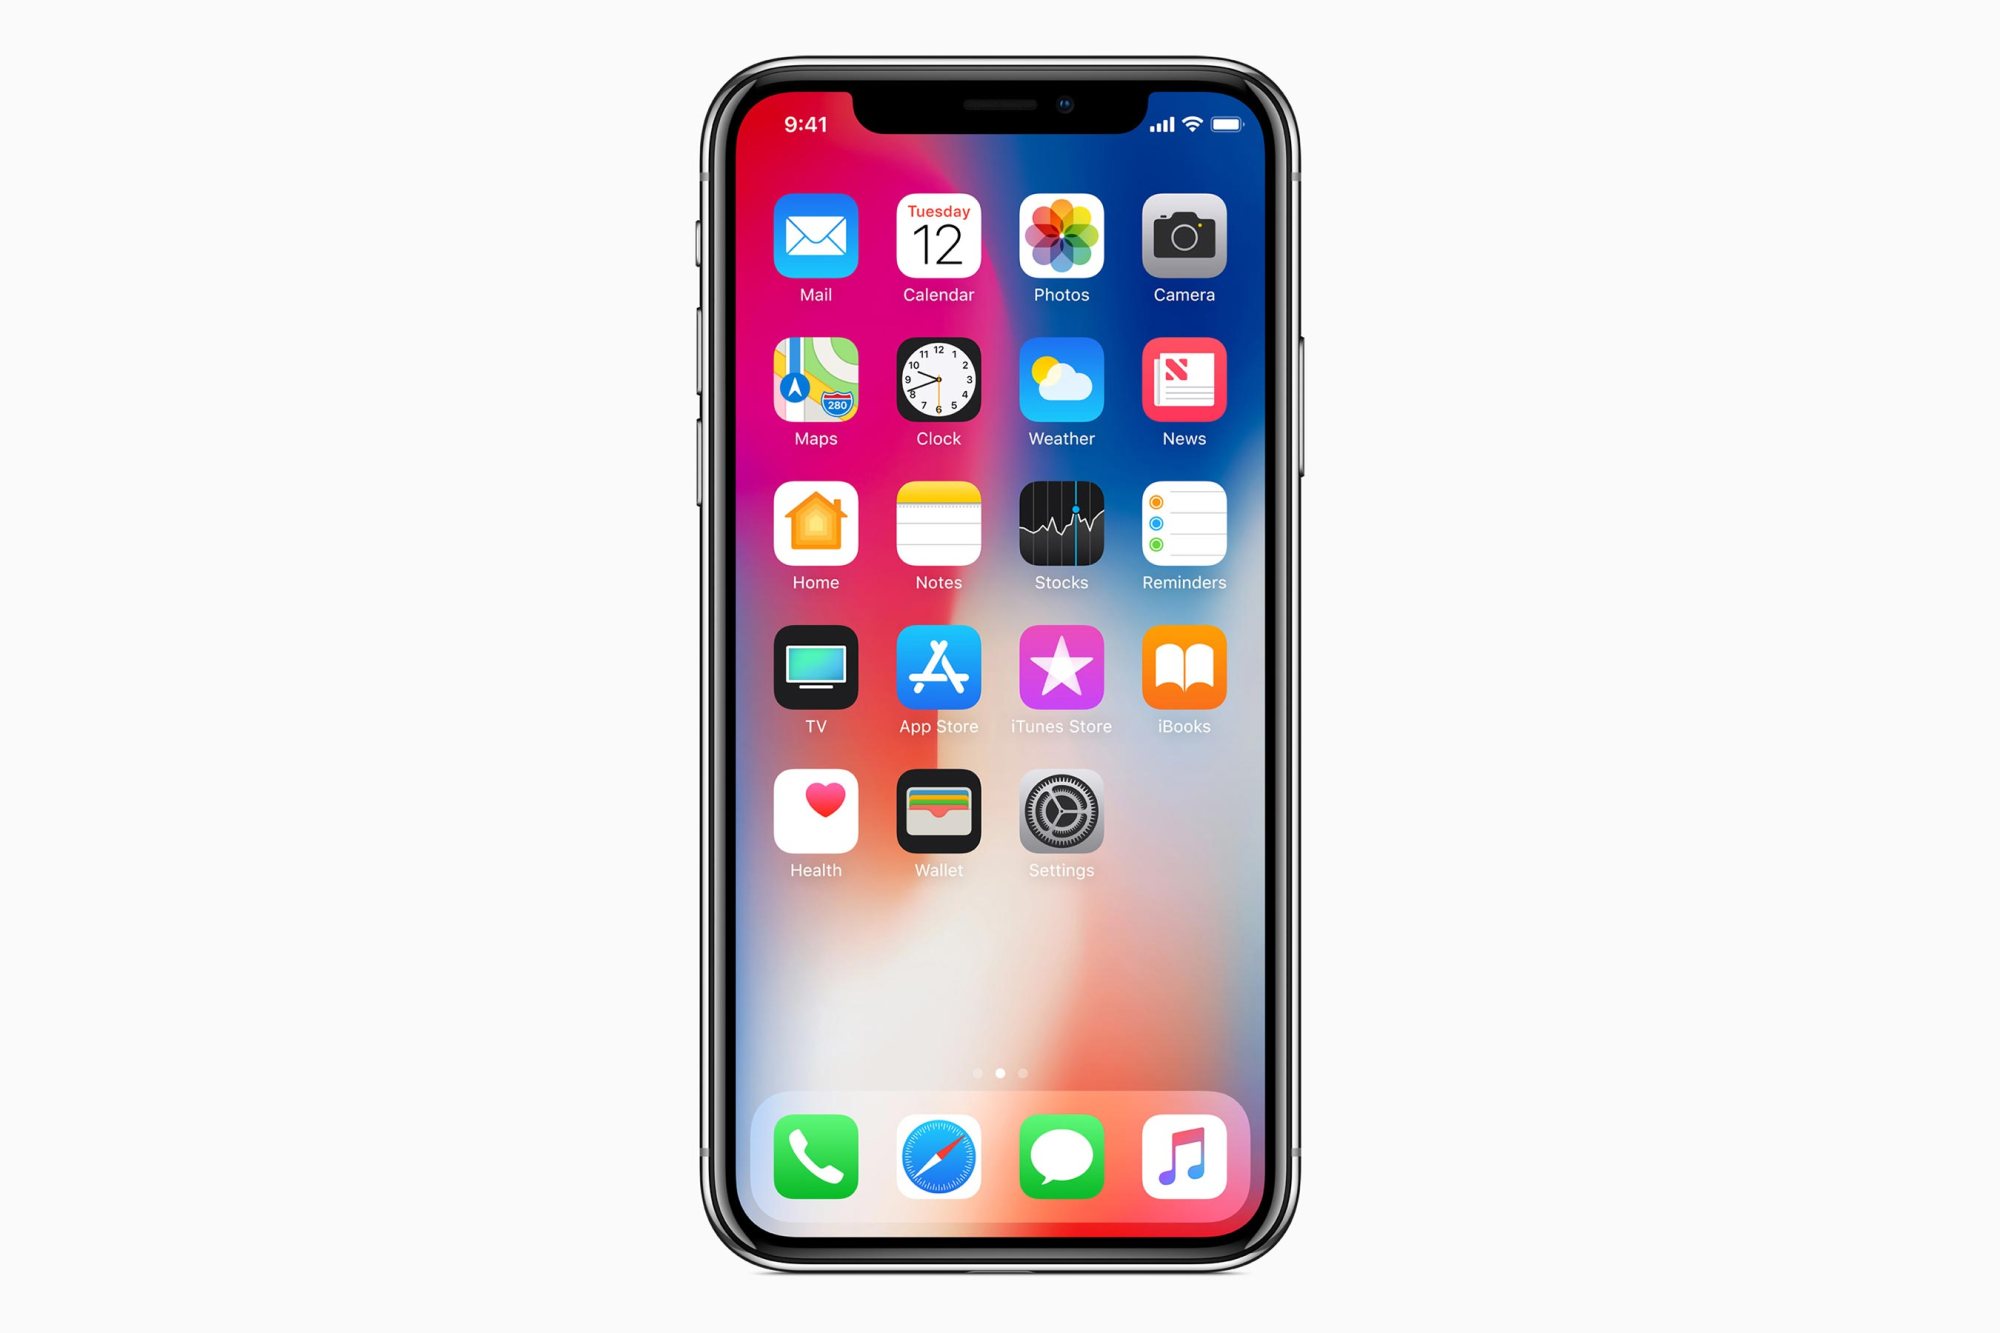 iphone x specifications, iphone x price, iphone x release date,